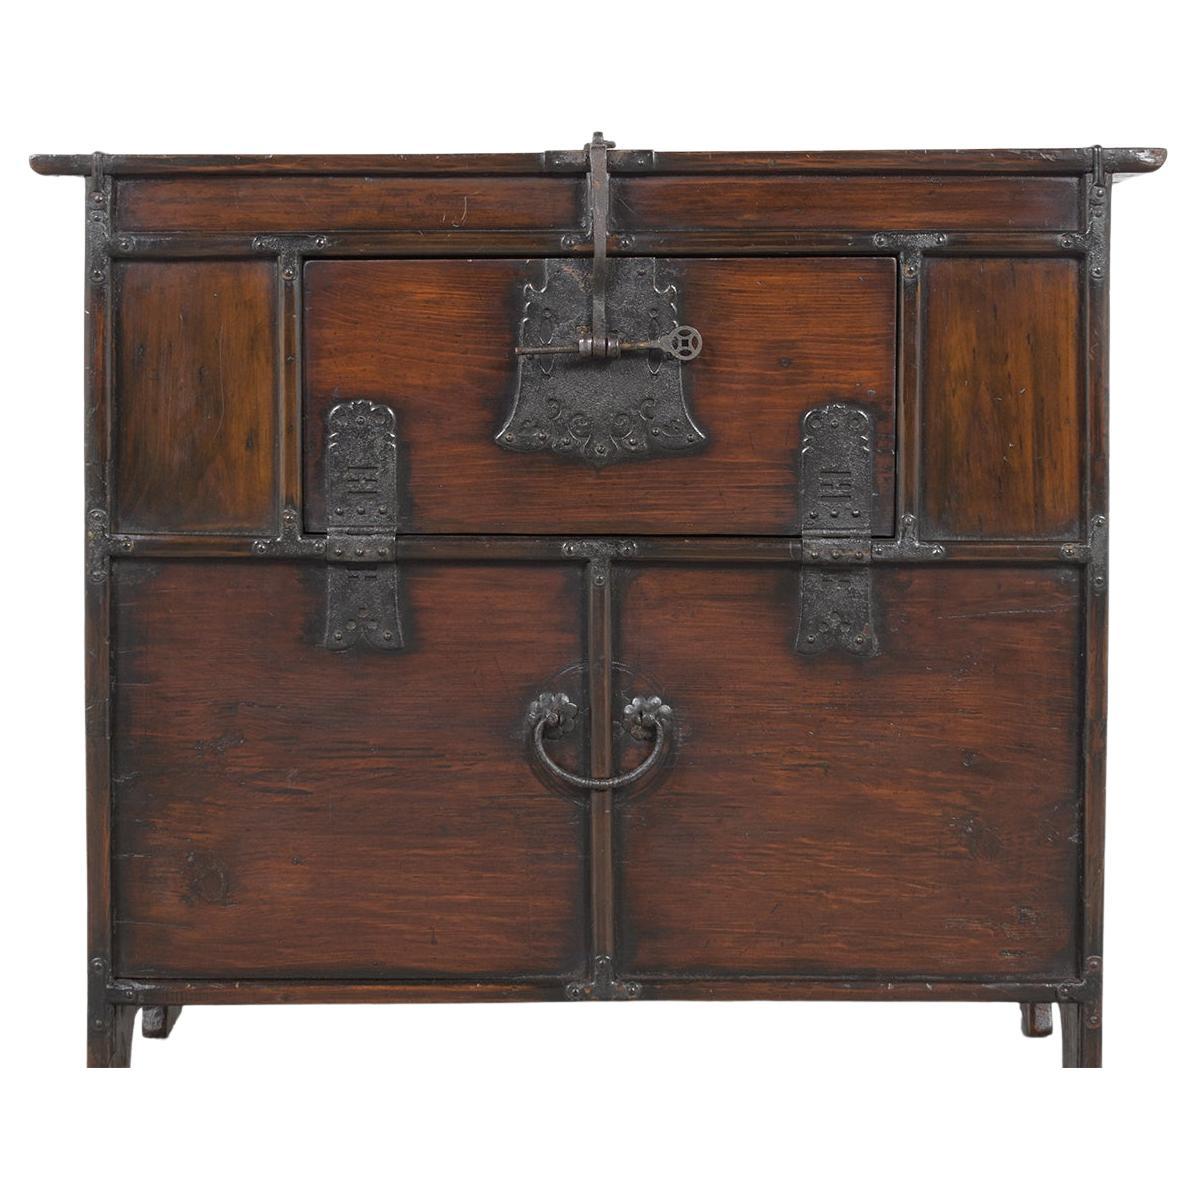 1900s Antique Japanese Elm Wood Cabinet with Iron Hardware & Patina Finish For Sale